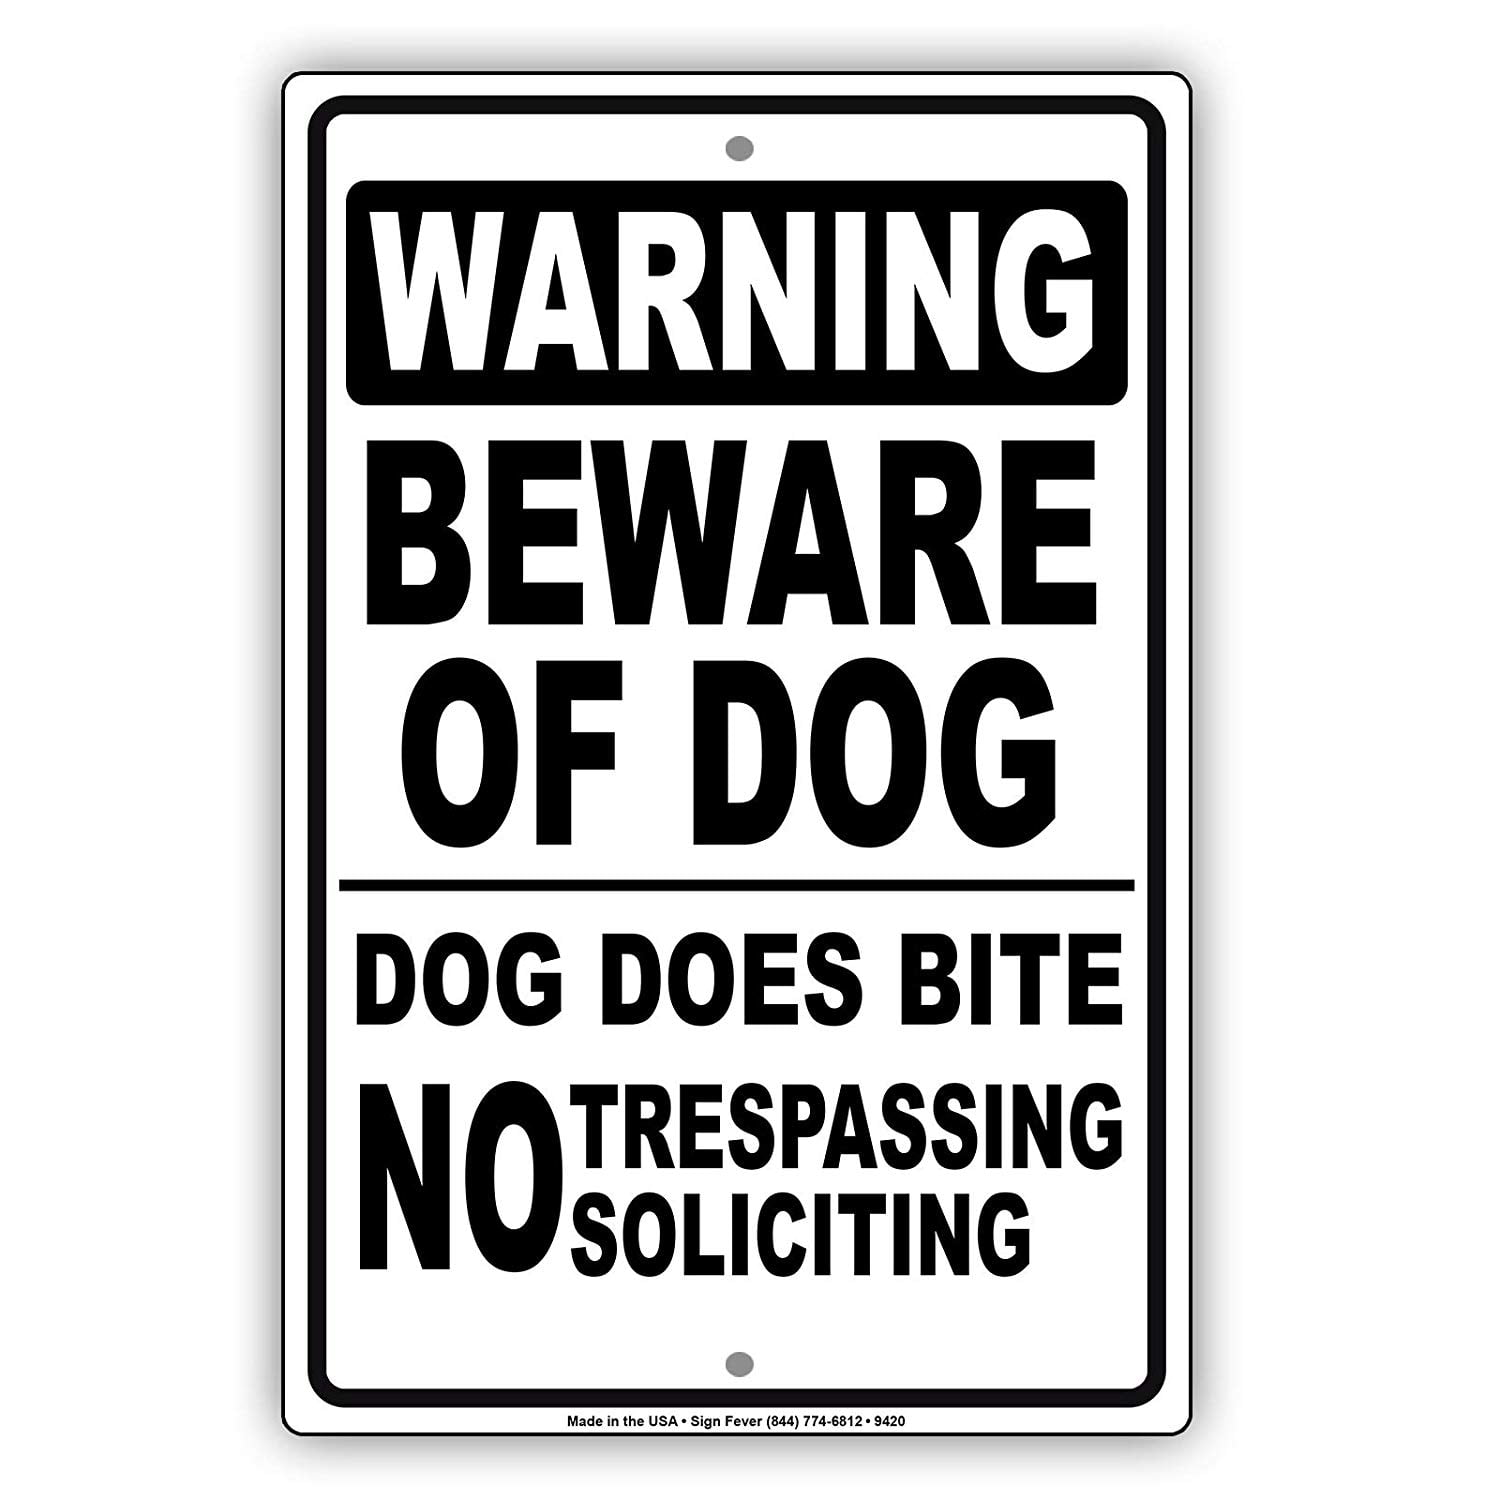 No Soliciting Go Away See Dog For Details Funny Metal Sign Yard Fence Home Decor 